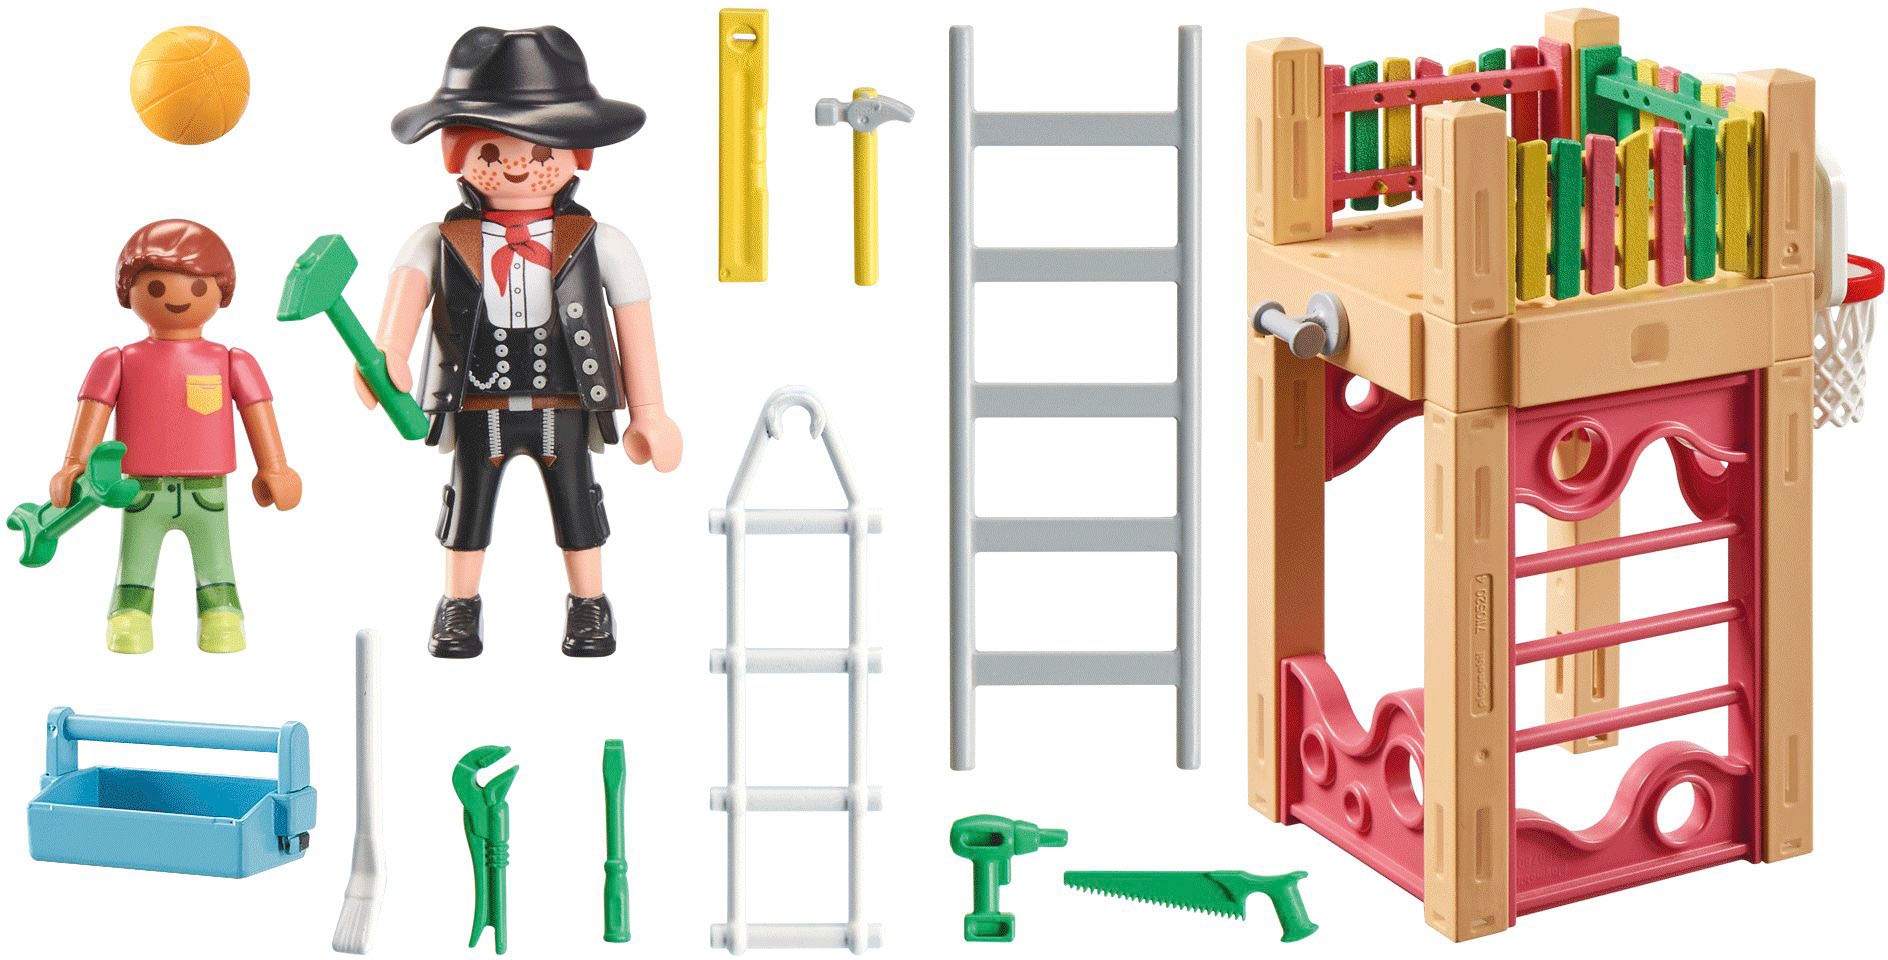 Playmobil® Konstruktions-Spielset »Zimmerin on tour (71475), City Life«, (58 St.), Spielturm, teilweise aus recyceltem Material; Made in Europe